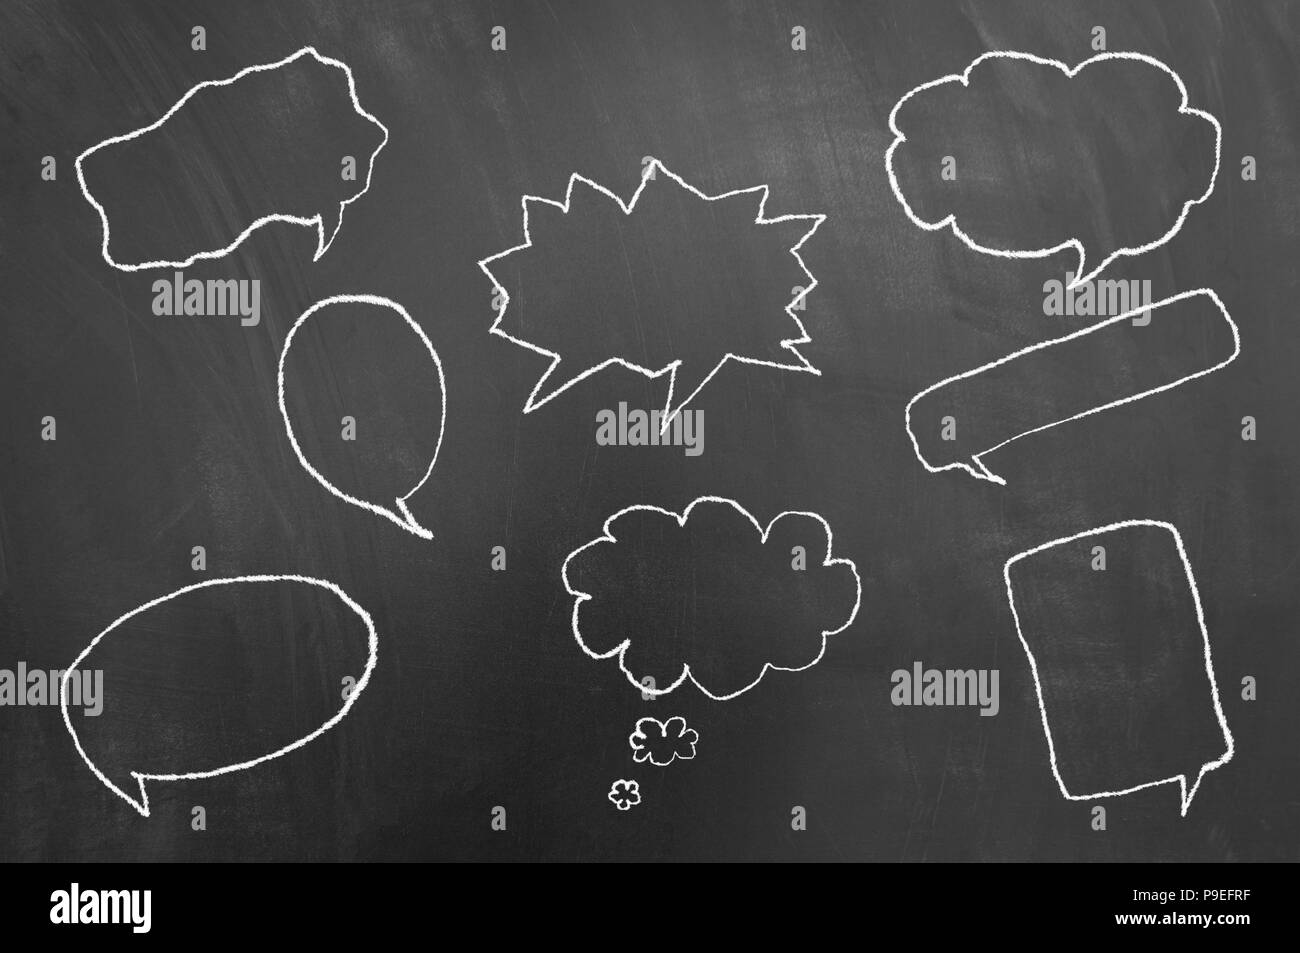 Multiple speech balloons drawing on blackboard or chalkboard as talk balloons with text copy space area concept Stock Photo